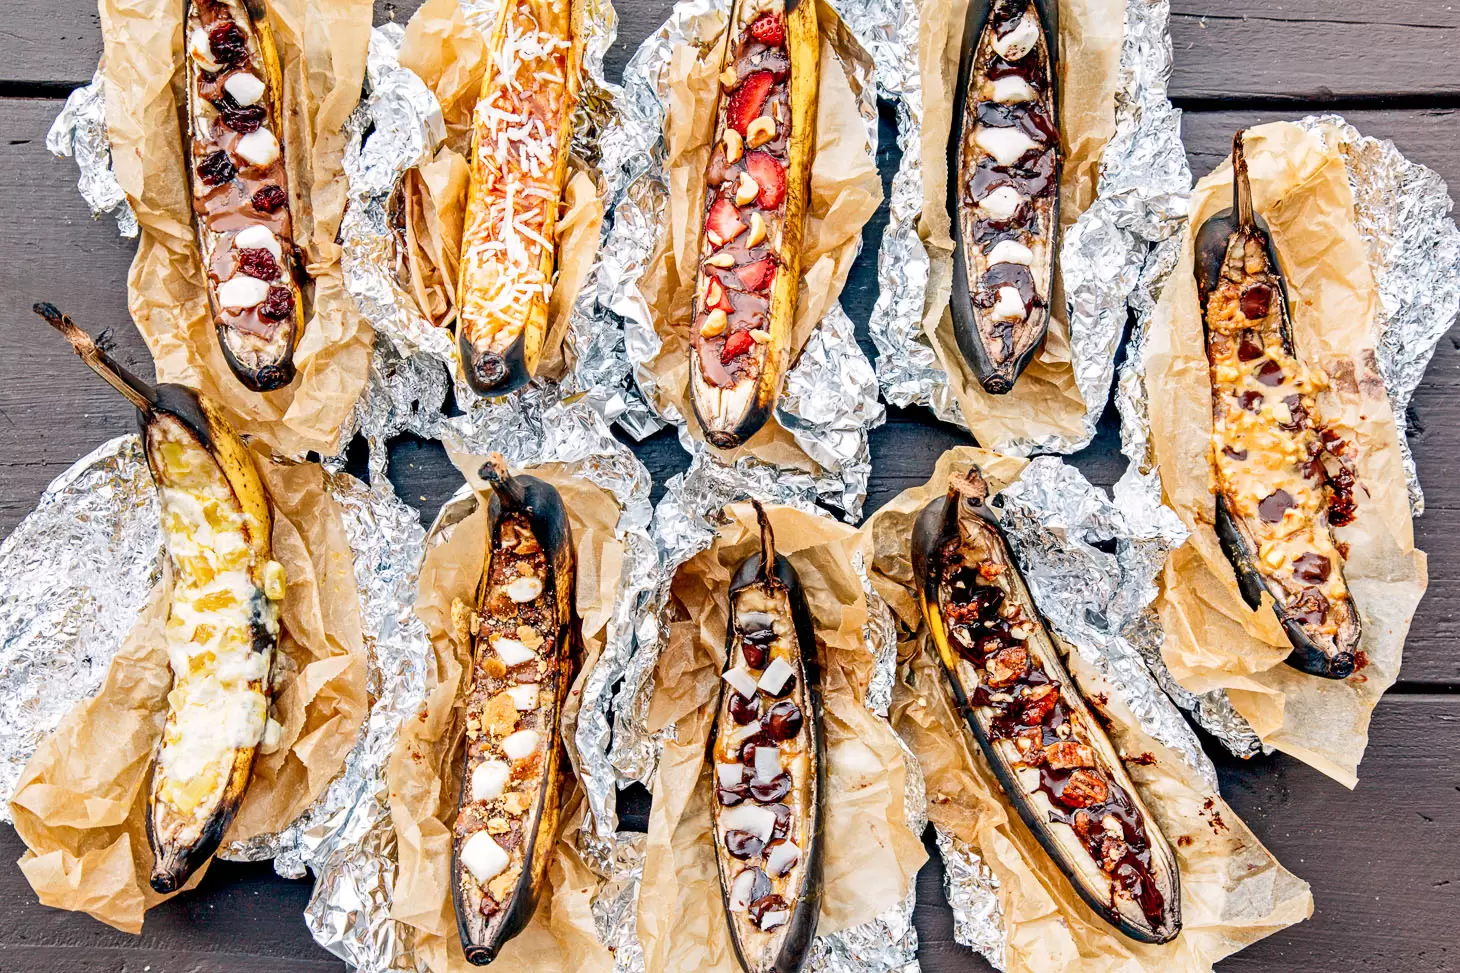 9 banana boats wrapped in foil with different toppings